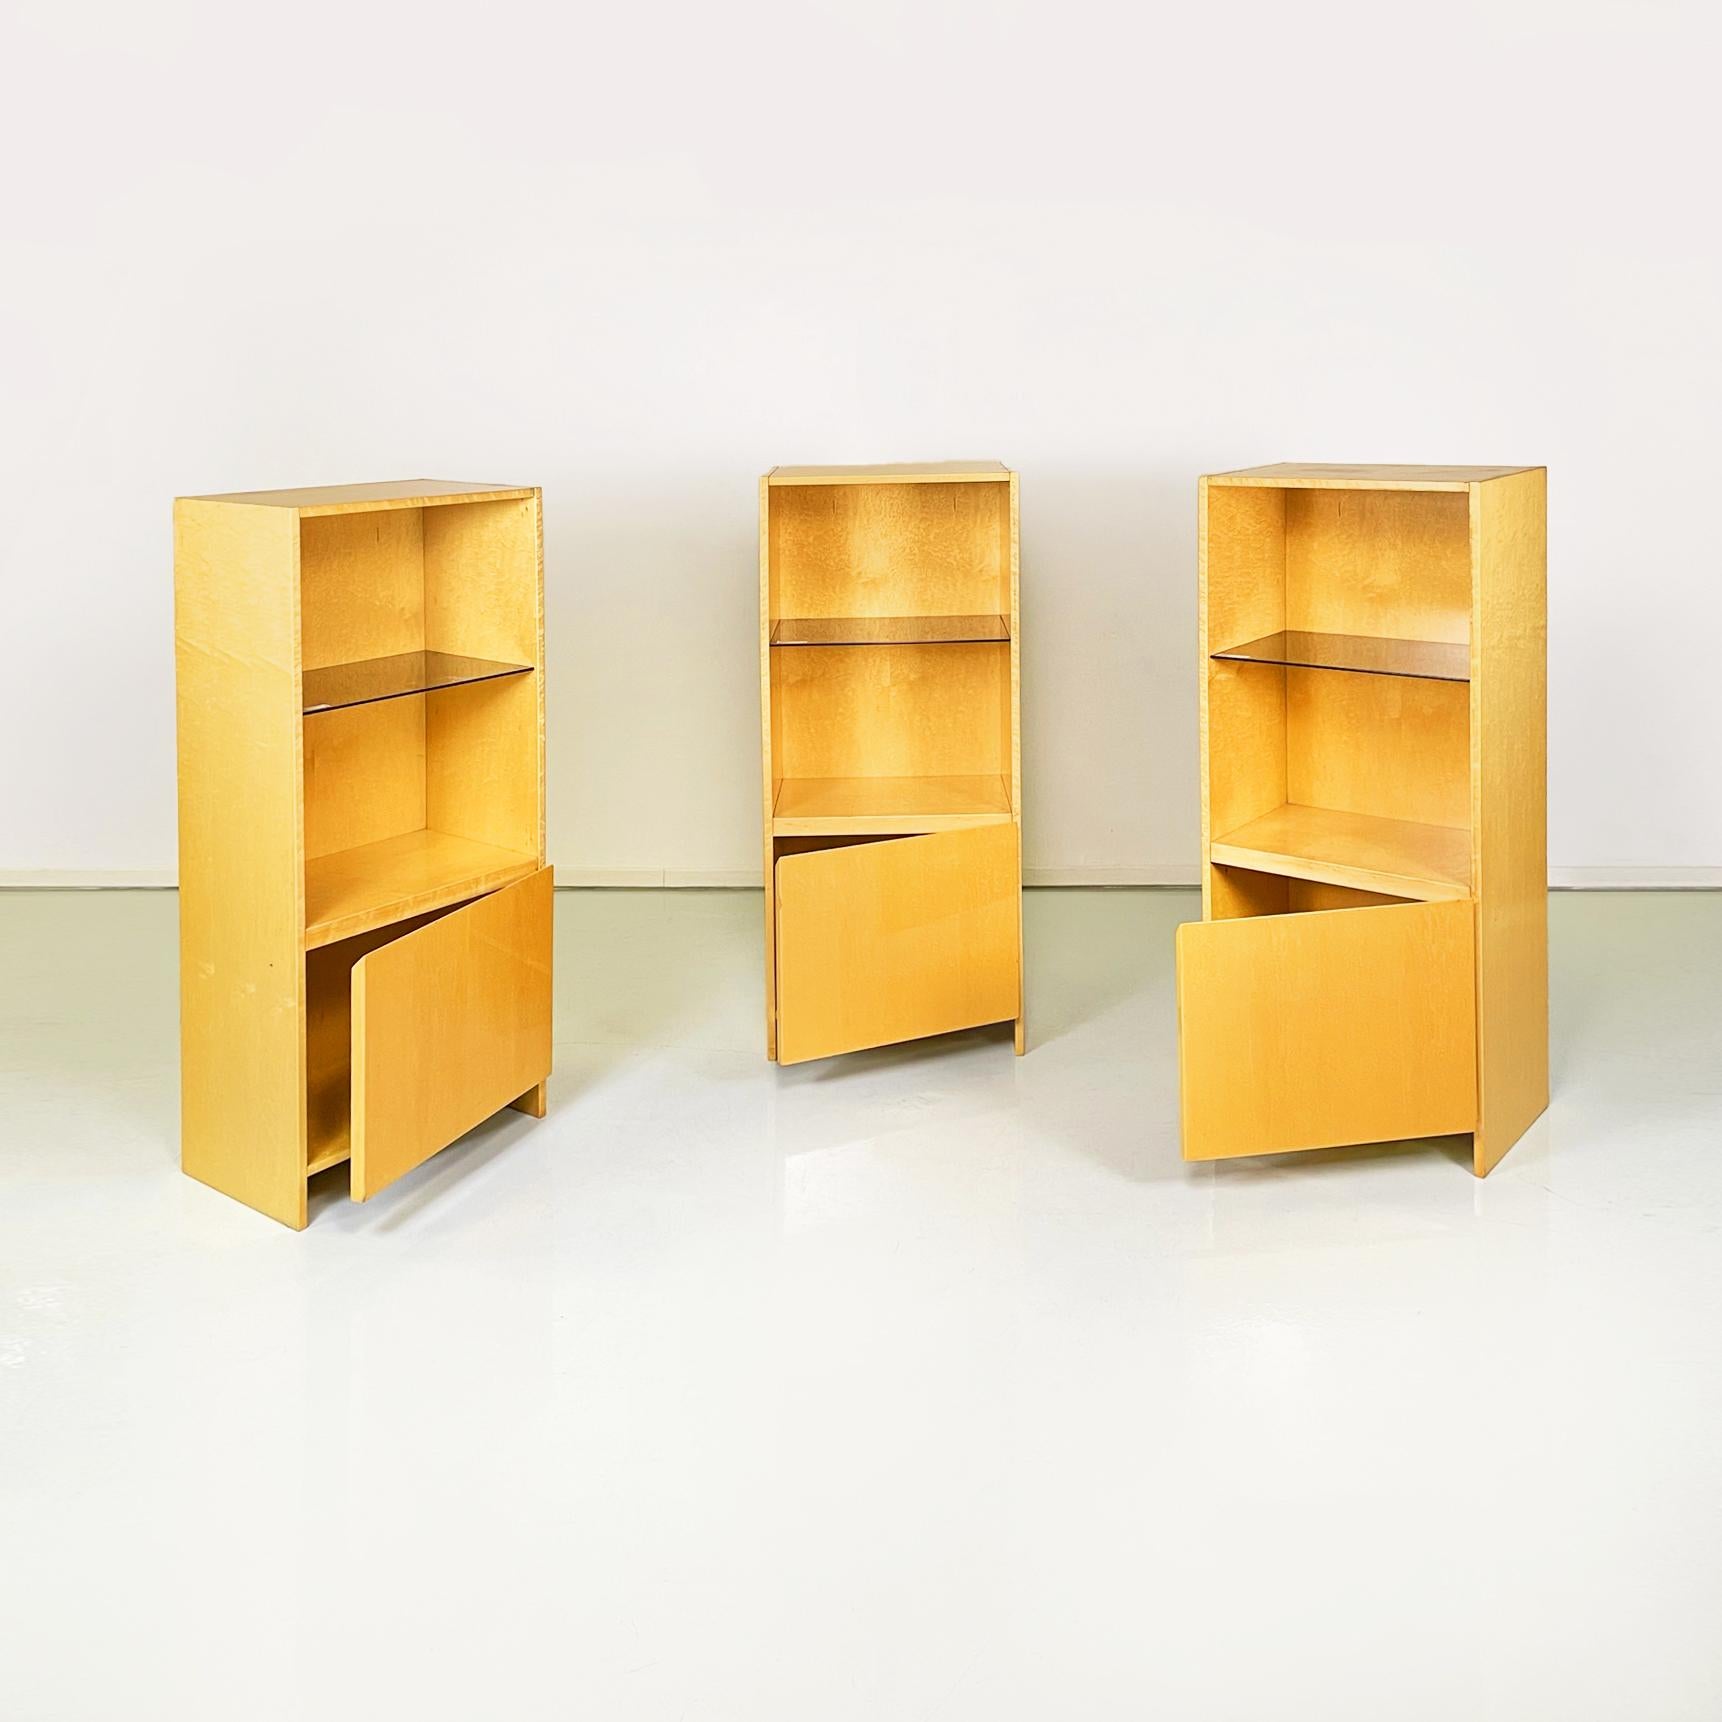 Italian modern Bookcase by Saporiti in light briar with smoked glass, 1970s
Wall bookcase composed of 3 rectangular modules in light briar. Each module has an open compartment in the upper part with a smoked glass top inside and in the lower part a